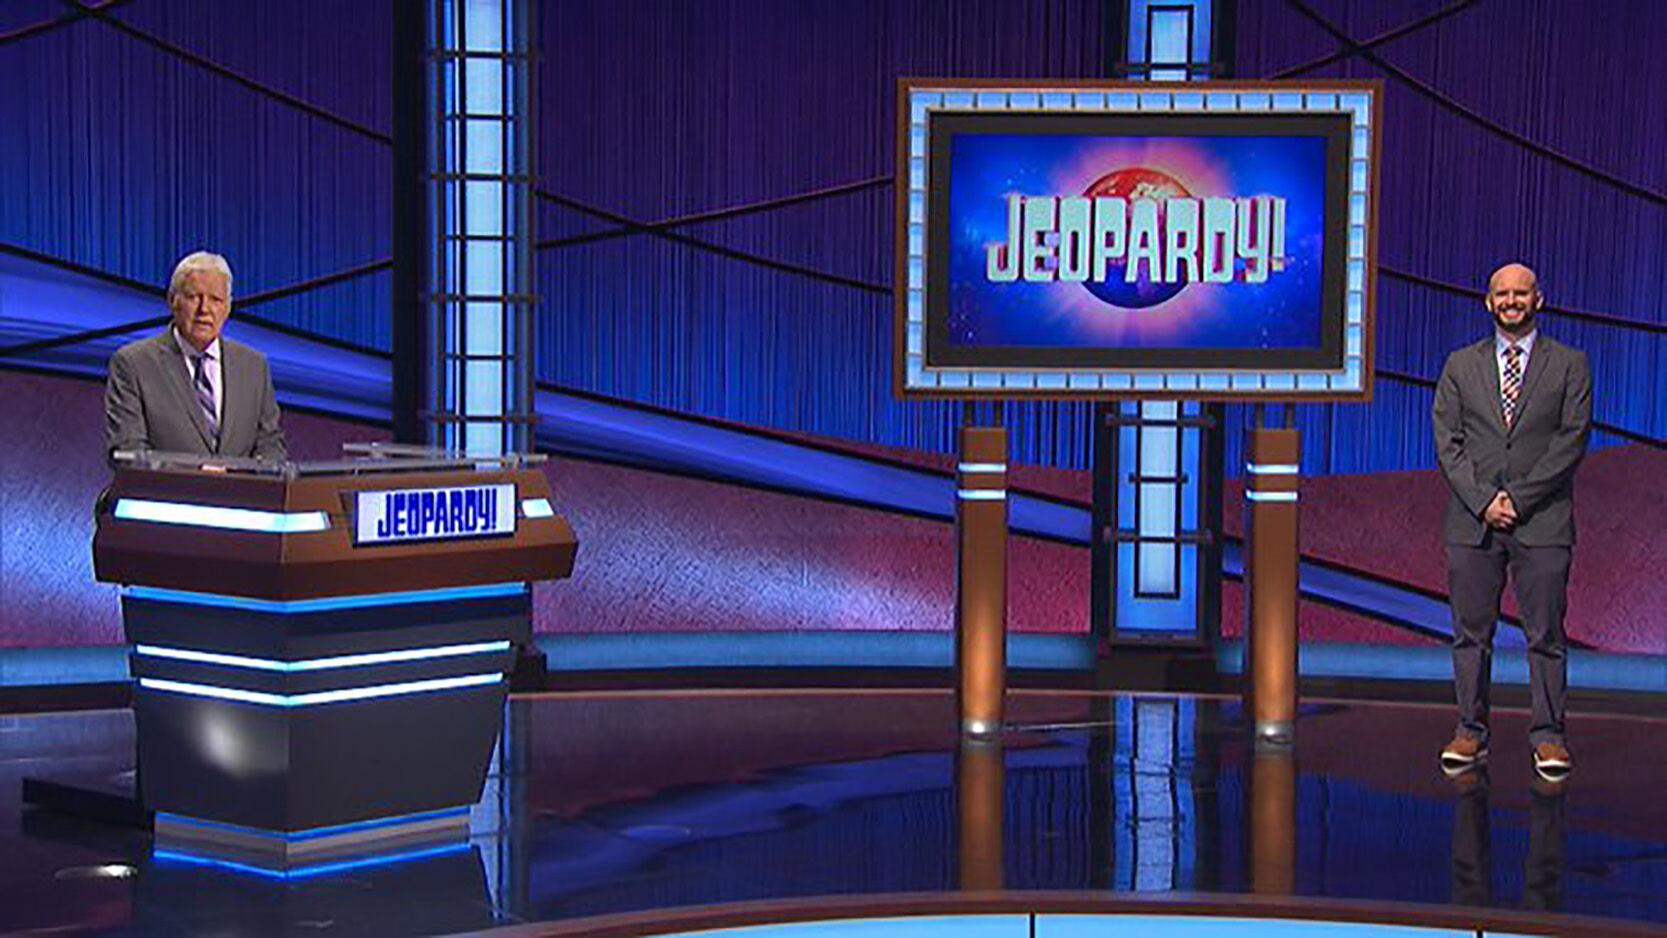 Back to School: Twisted! A Jeopardy Style Review Game